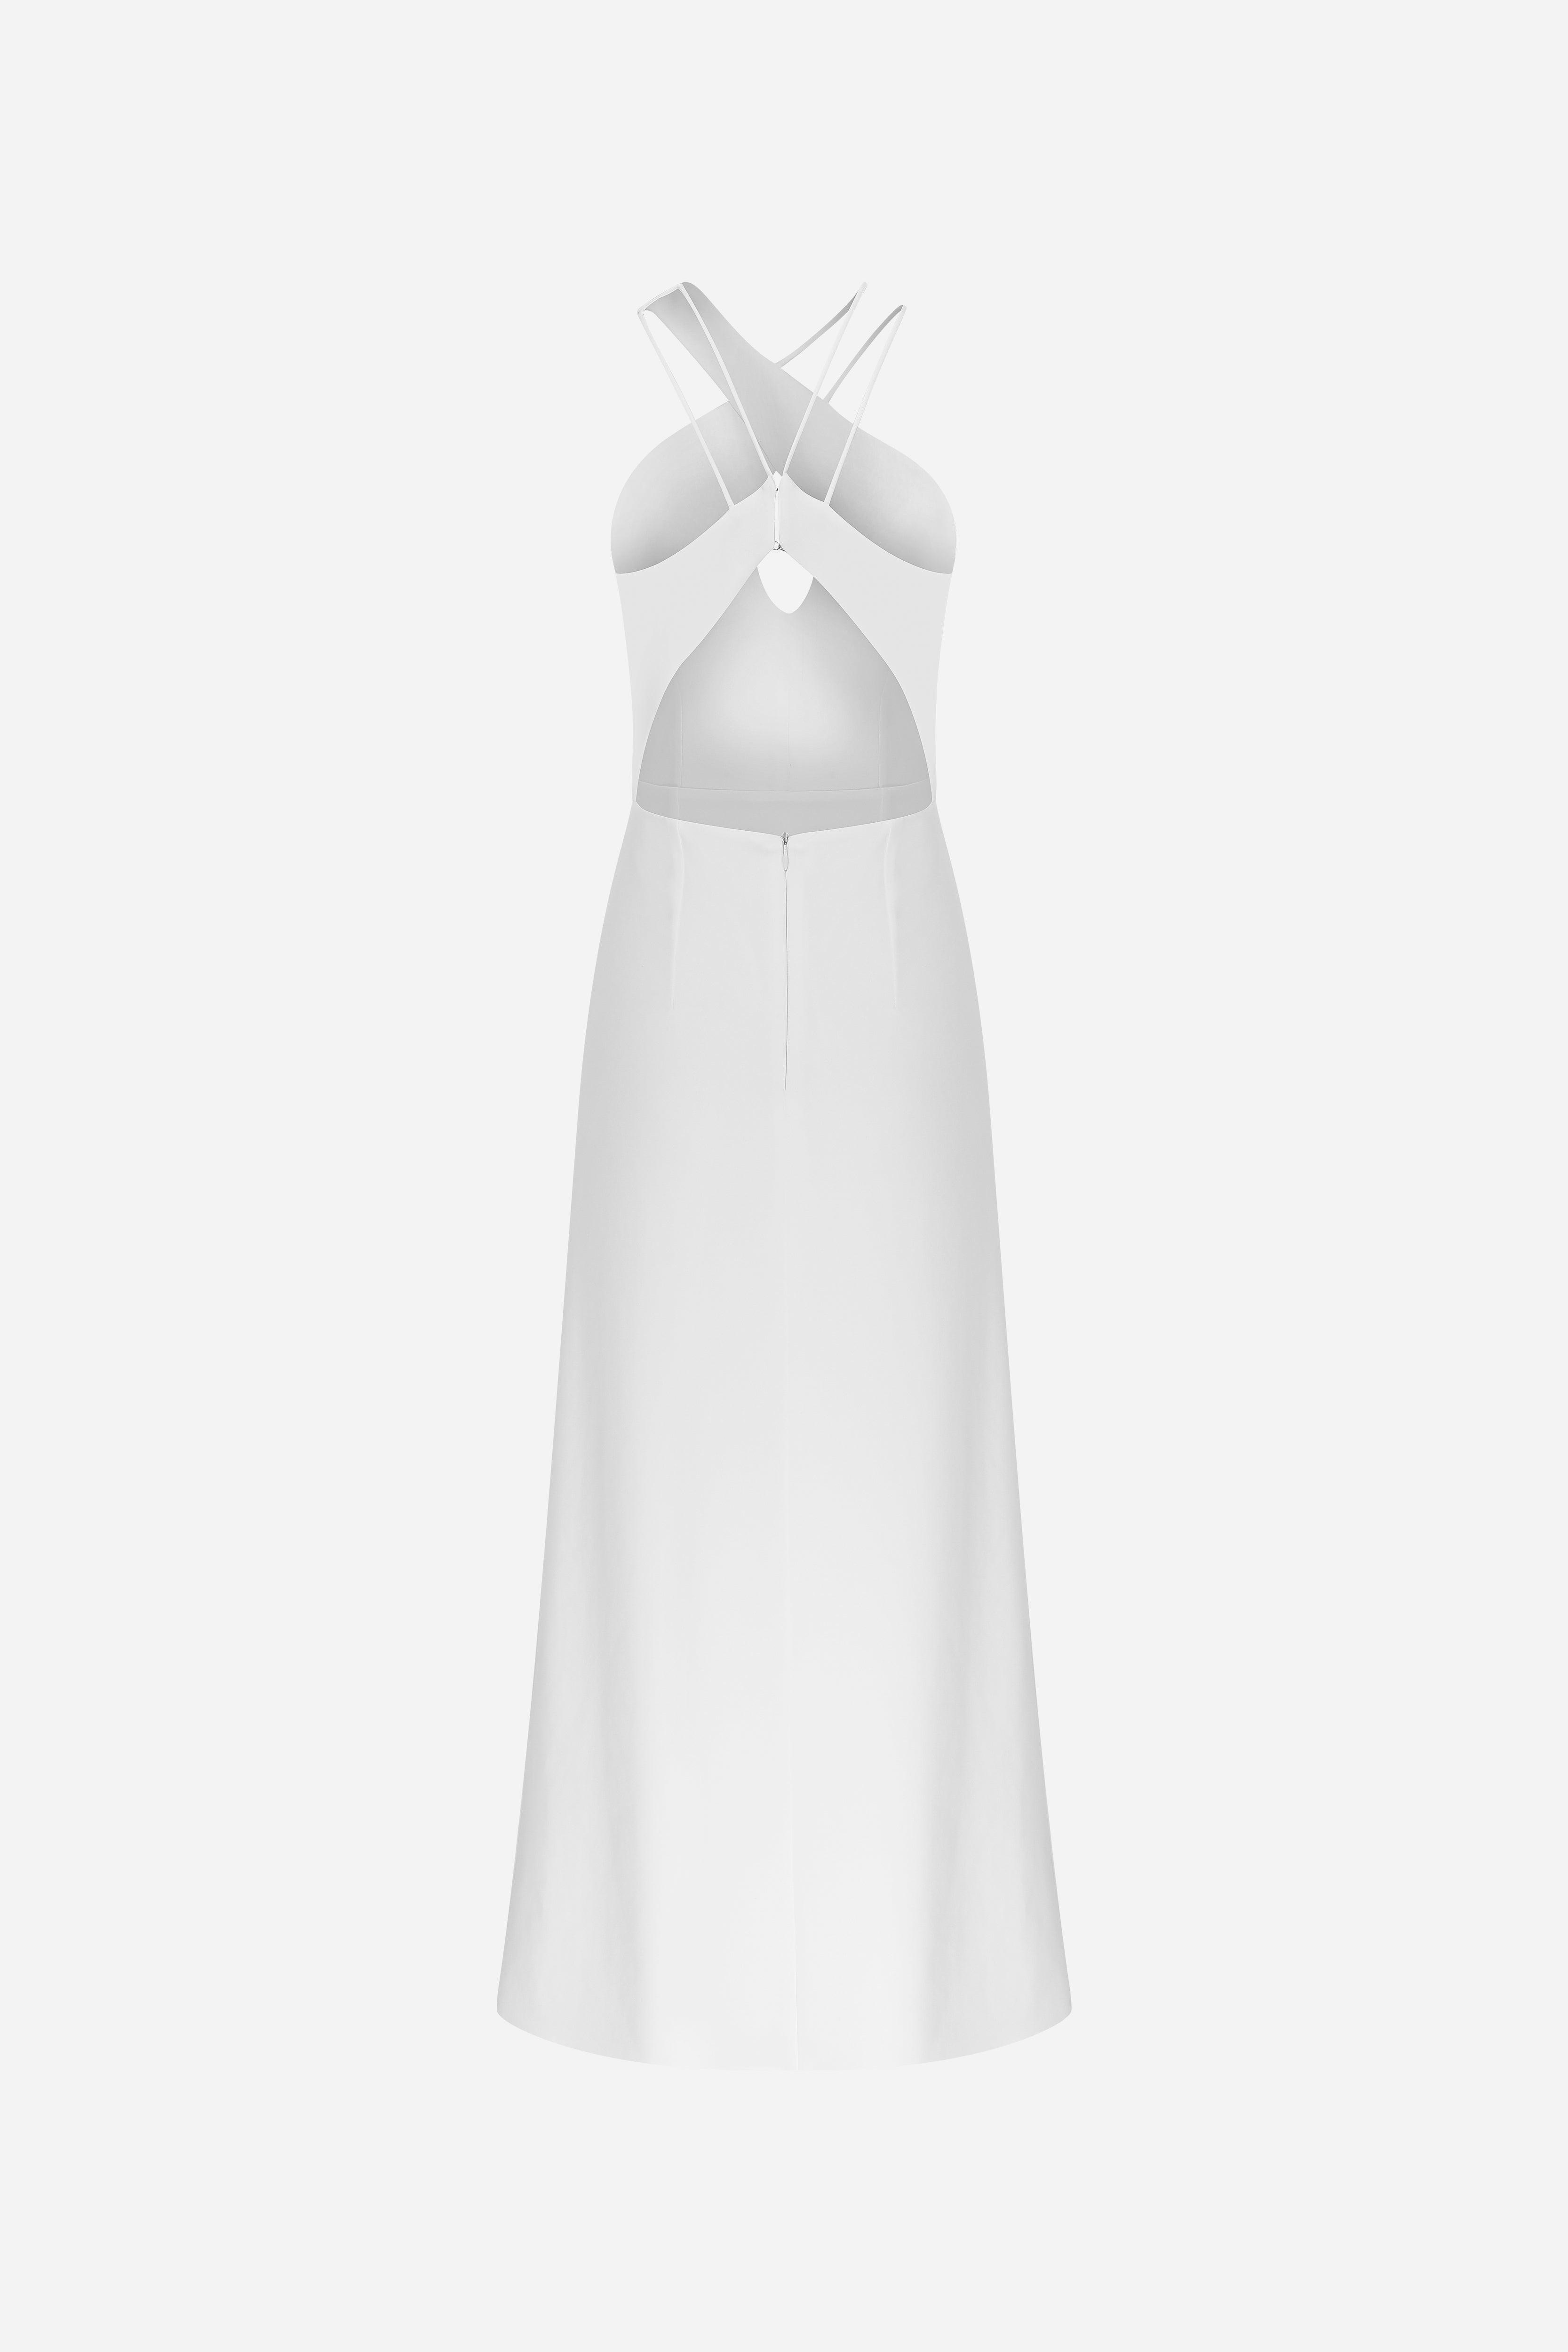 Hollow - Midi Dress With Front Tear Shaped Opening